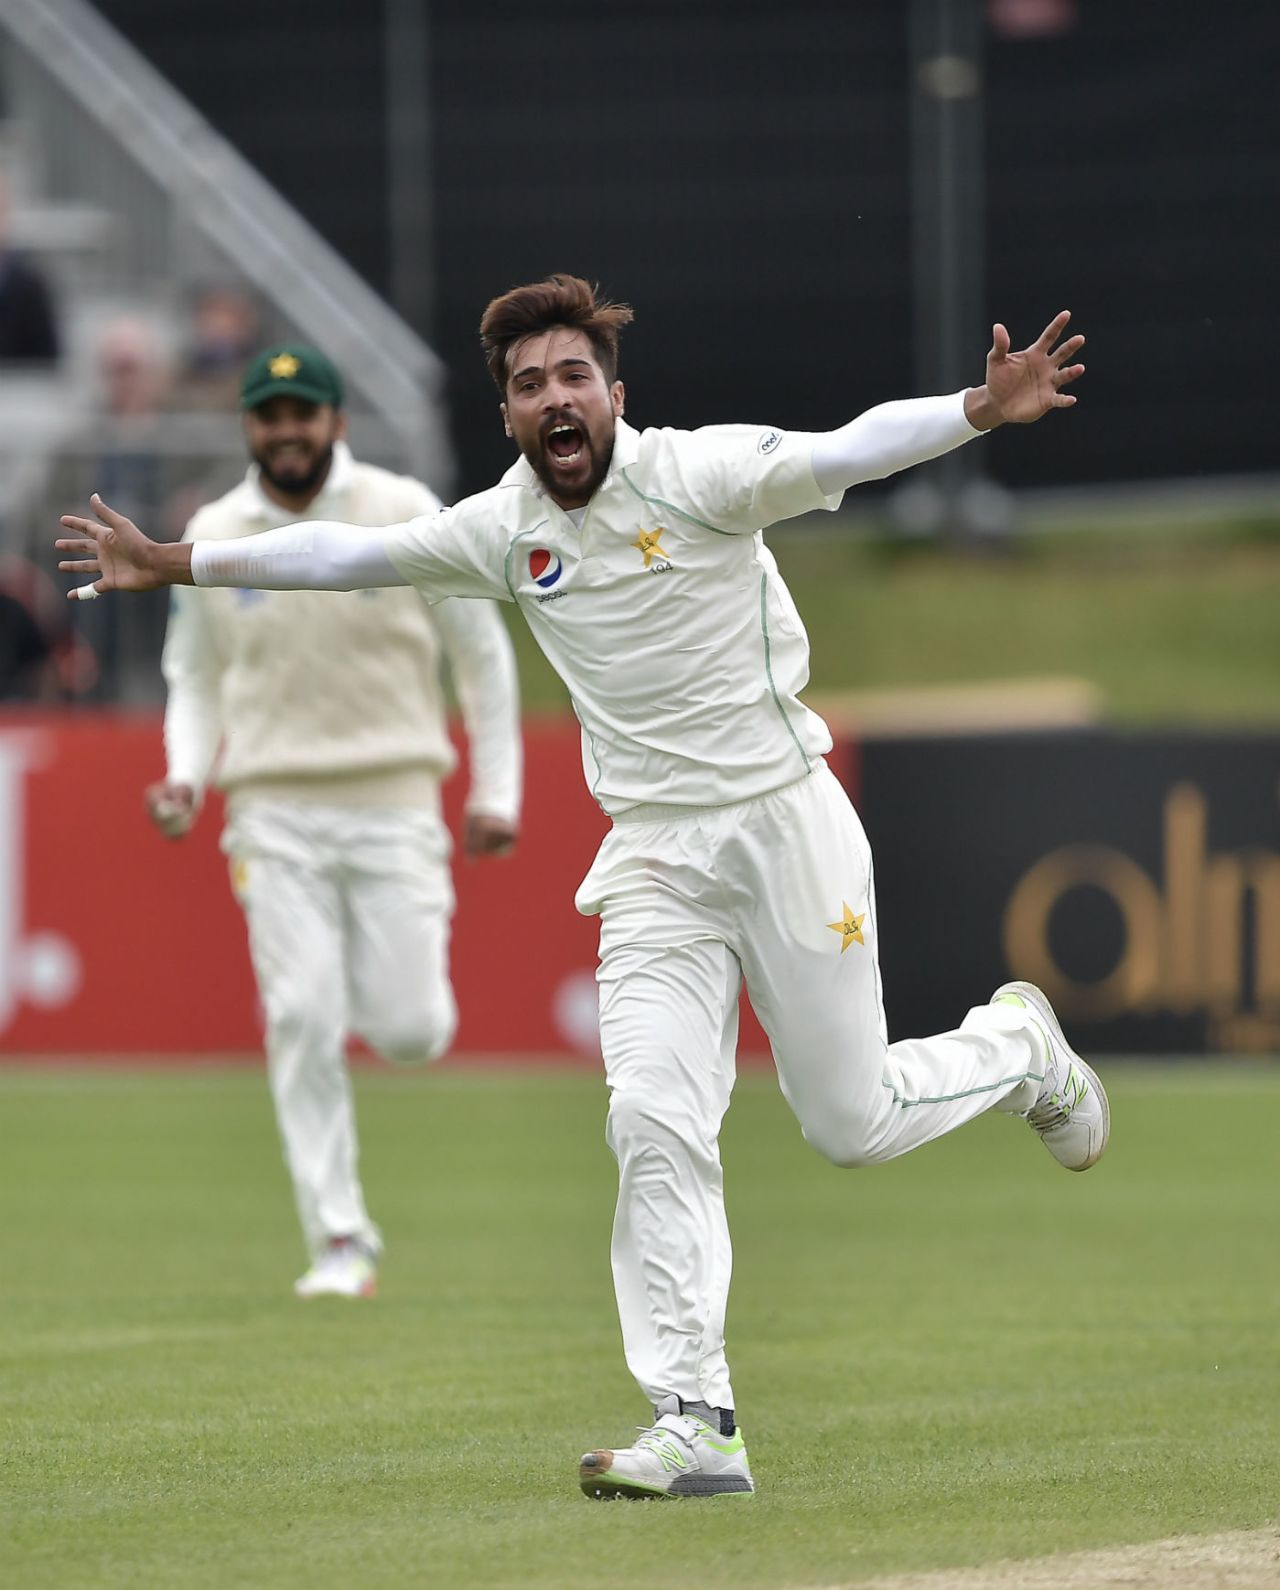 Mohammad Amir sets off in celebration at another wicket, Ireland v Pakistan, Only Test, Malahide, 4th day, May 14, 2018